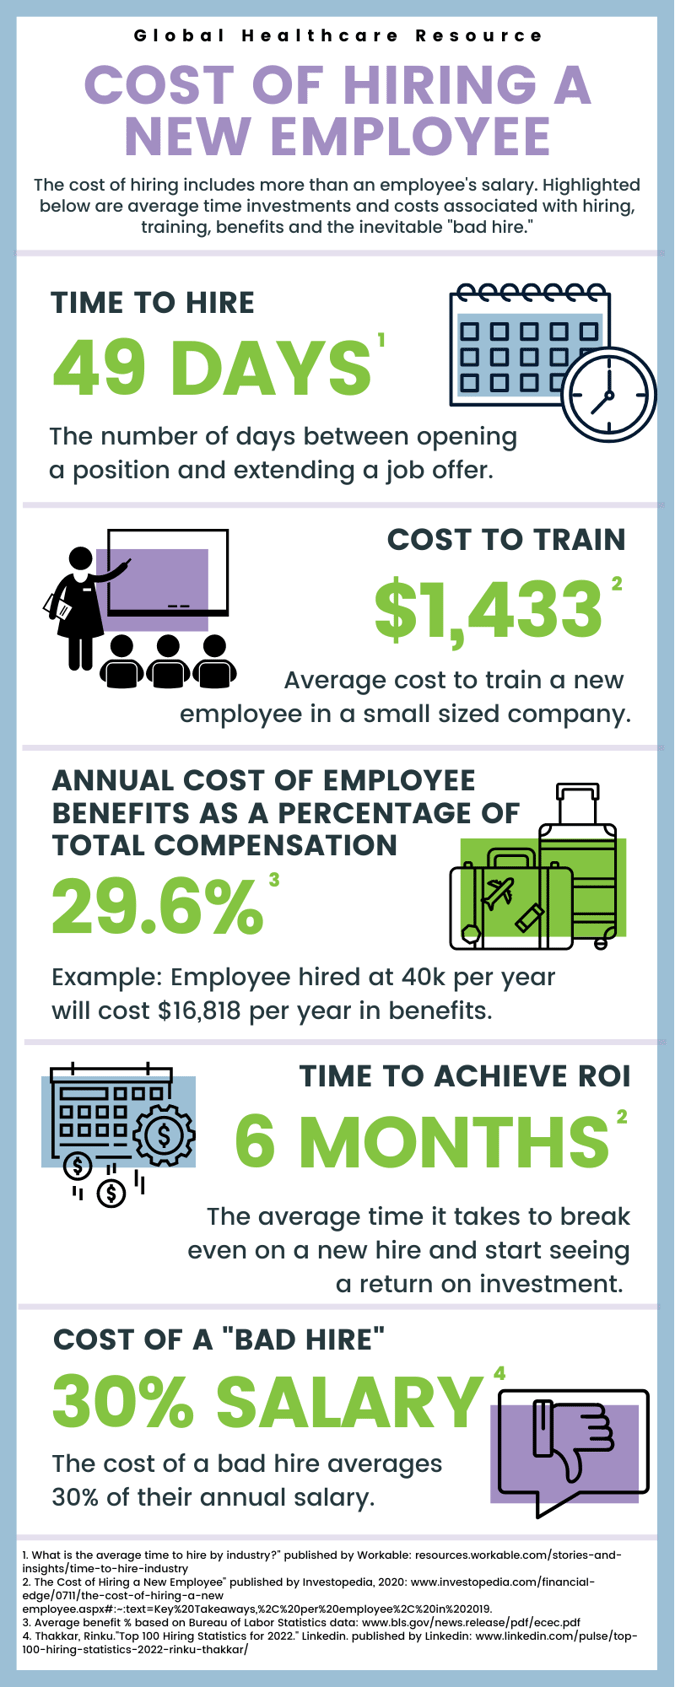 Cost of Hiring a New Employee_2023